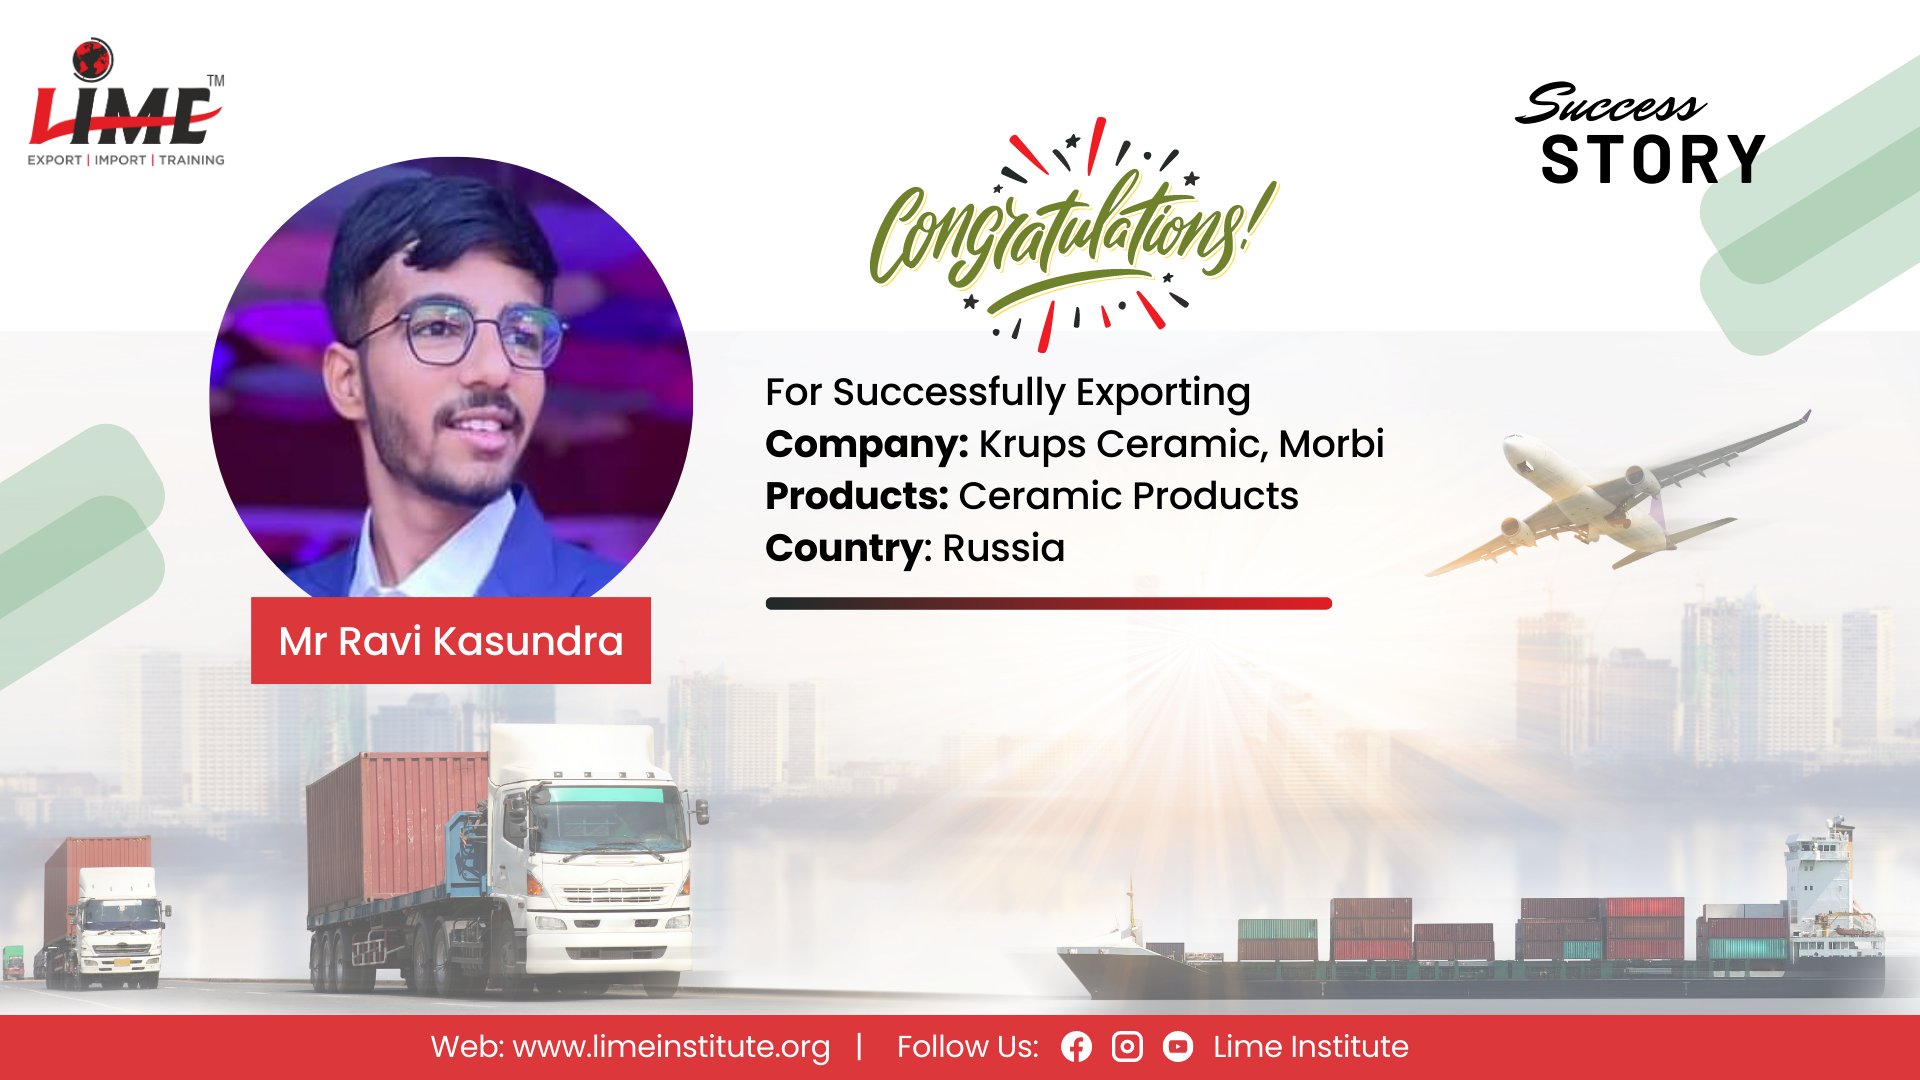 Congratulations, Ravi Kasundra!  We are thrilled to celebrate your remarkable success in the world of export business. Your dedication, hard work, and entrepreneurial spirit have propelled you to new heights, and we couldn't be prouder.